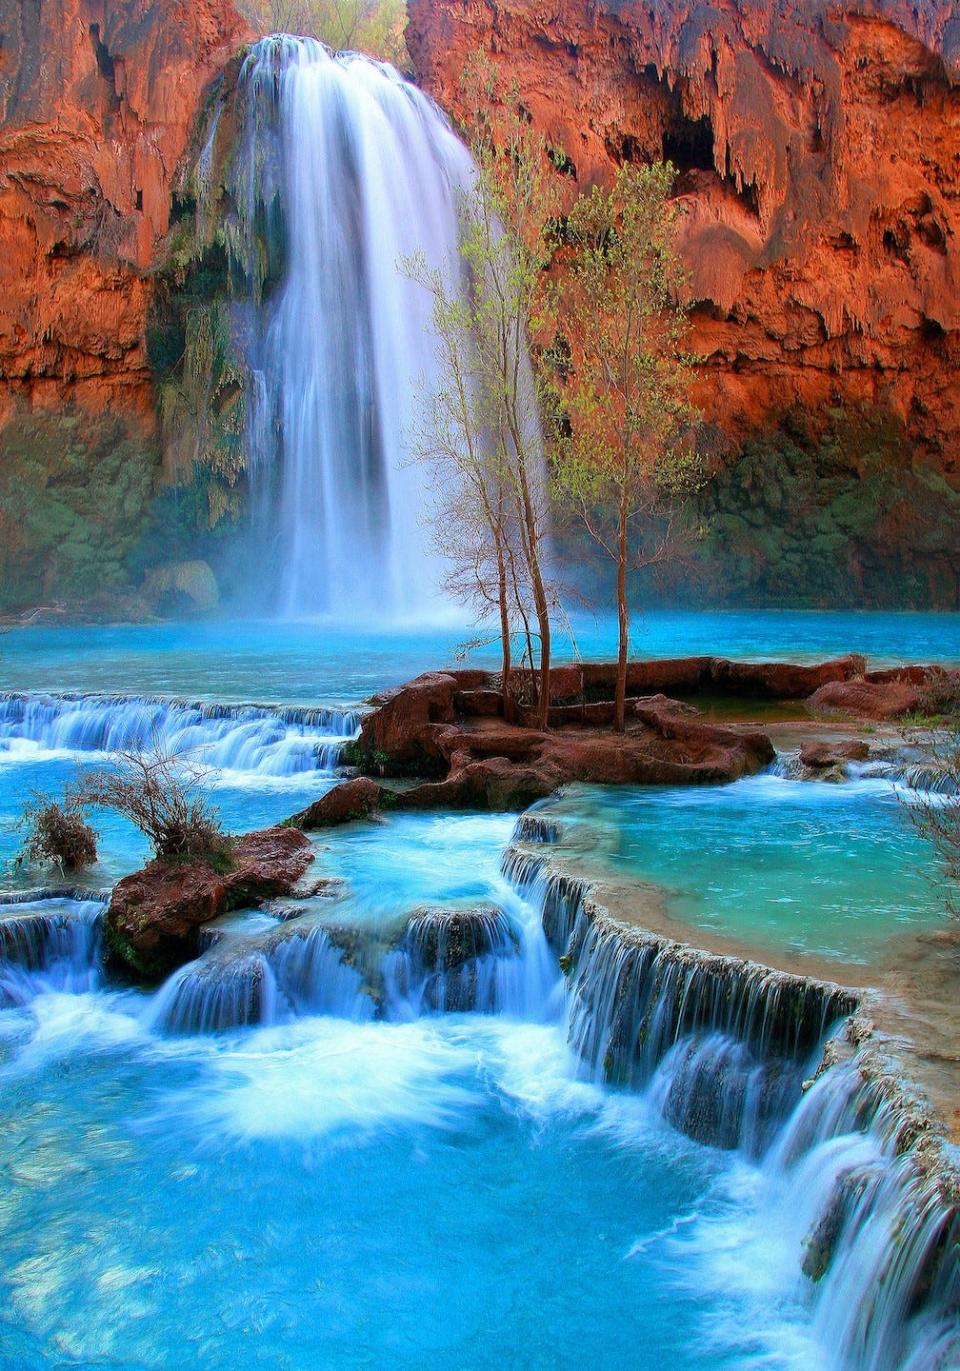 The Havasupai Indian Reservation includes the remote village of Supai, where the mail is still delivered by mule, and the spectacular Havasupai waterfalls attract visitors.